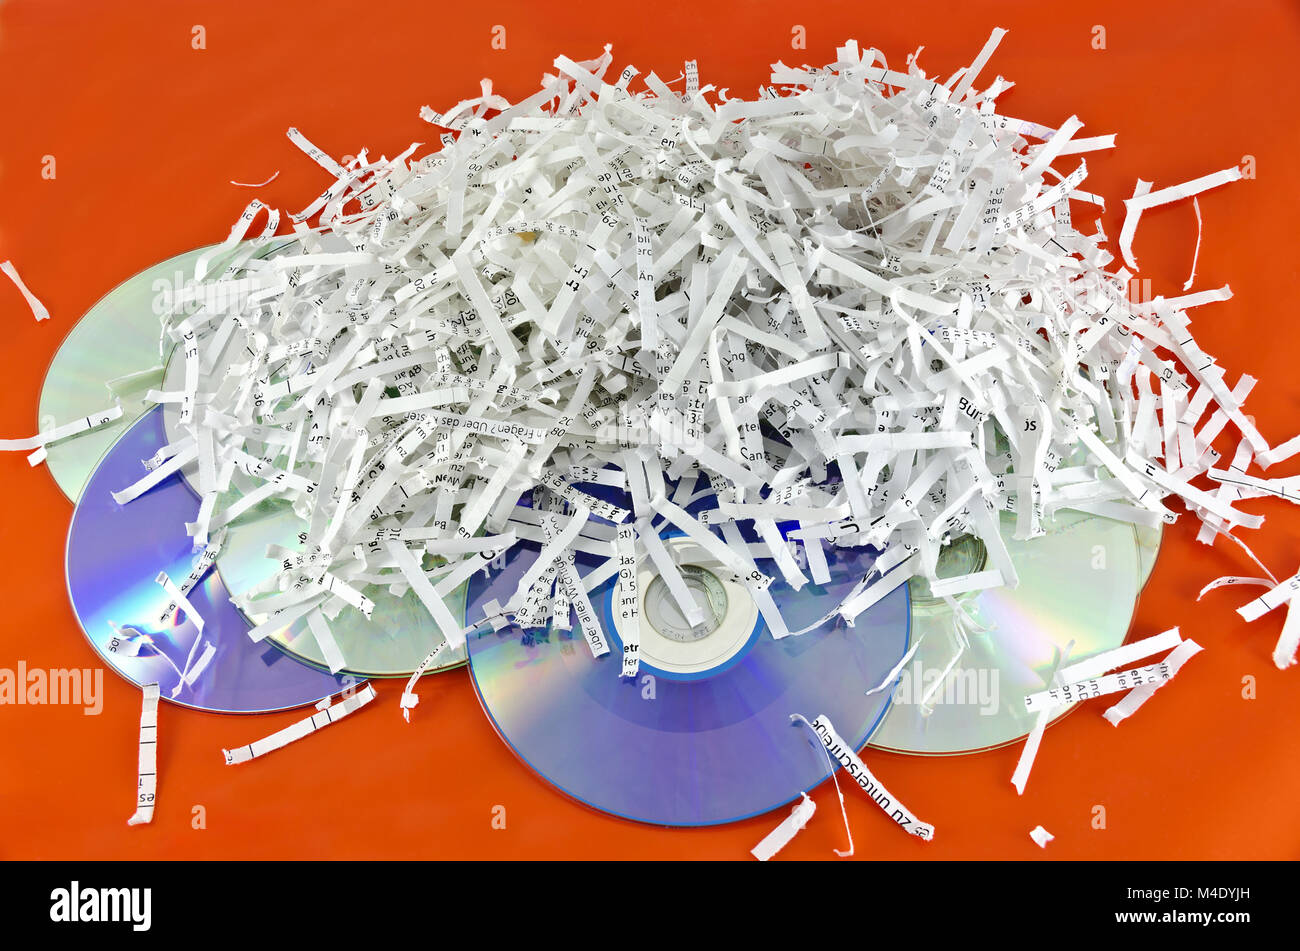 storage discs and shredded paper sheets Stock Photo